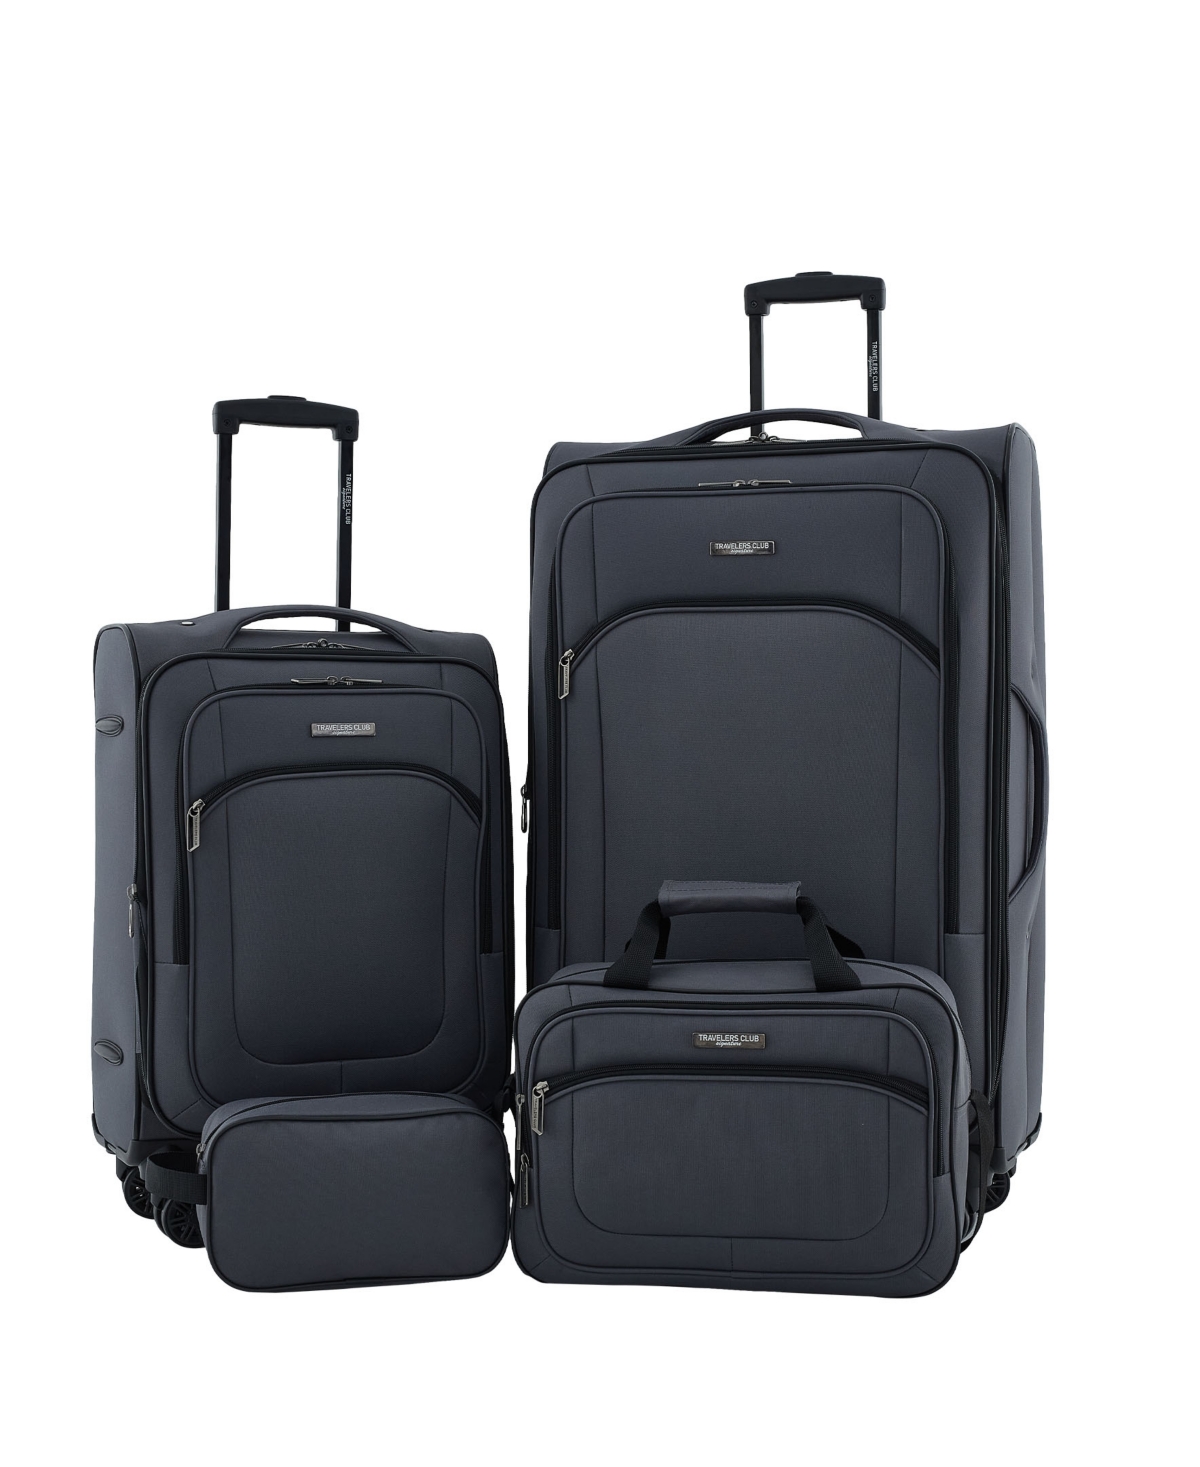 4 Piece Expandable Rolling Luggage Collection - Gray